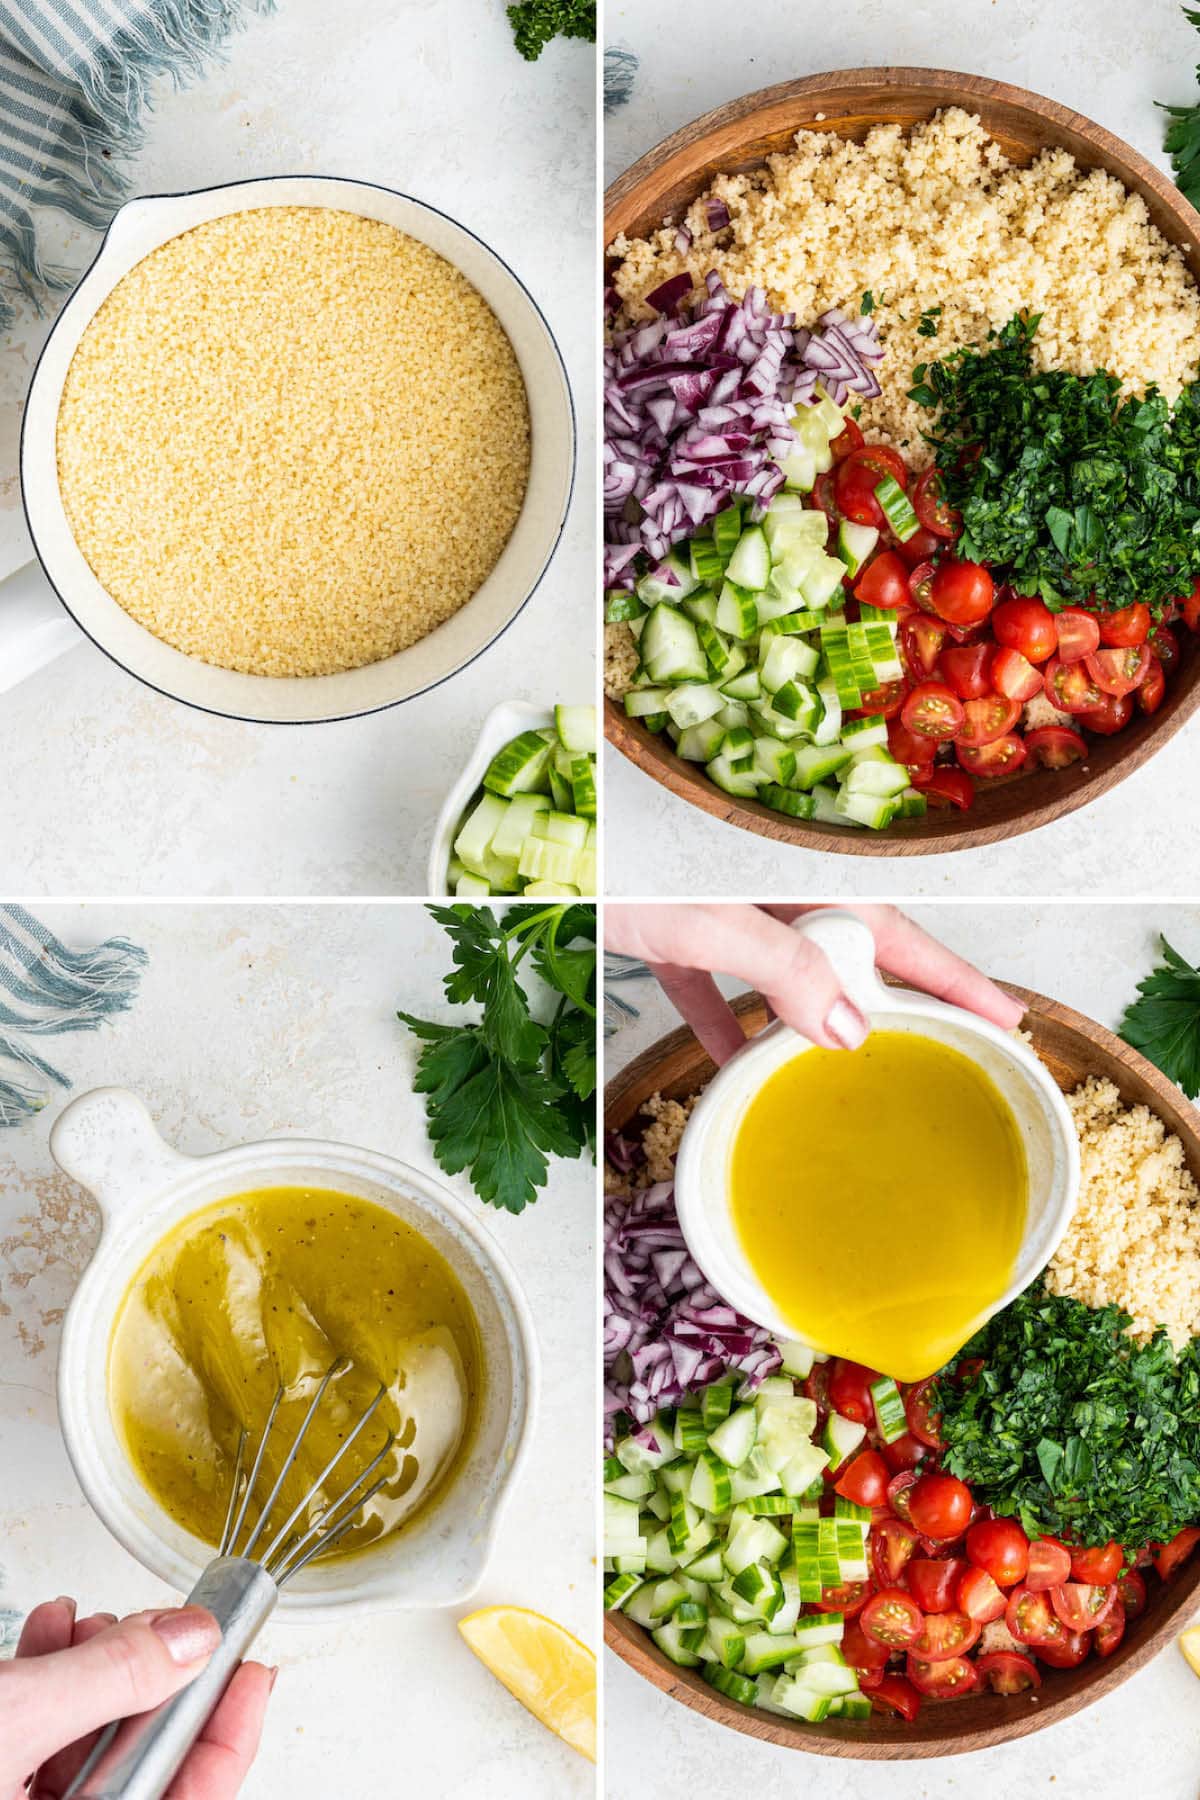 Collage of four photos showing how to make Couscous Salad: cooking the couscous, adding veggies to a bowl with couscous, whisking dressing and then pouring the dressing over the salad.